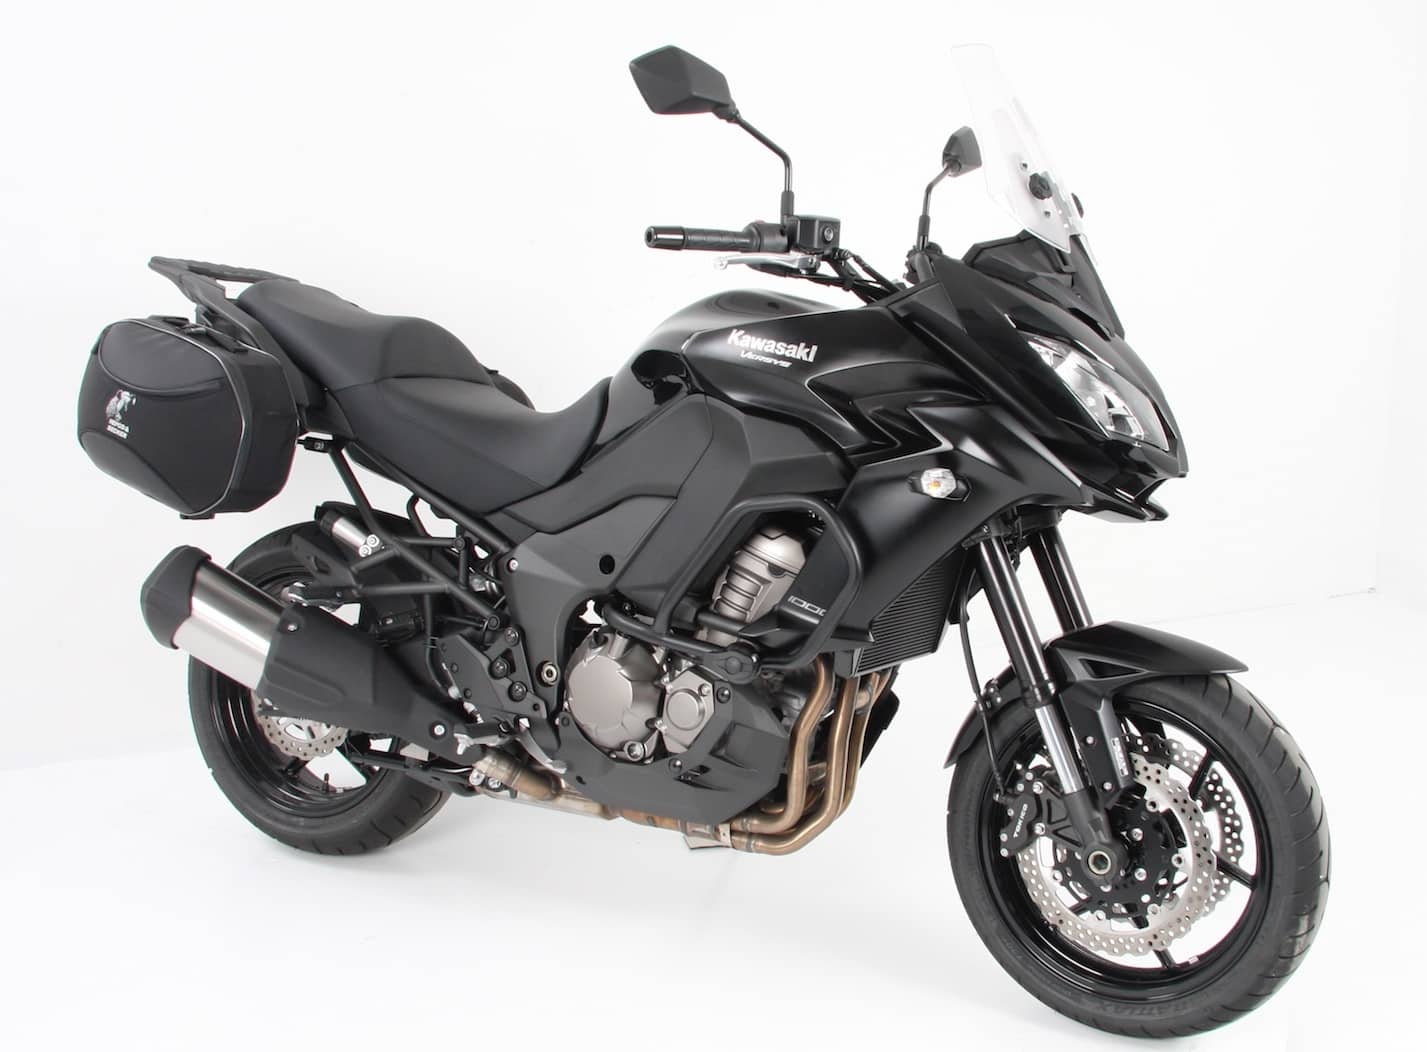 C-Bow sidecarrier for Kawasaki Versys 1000 (2015-2018)